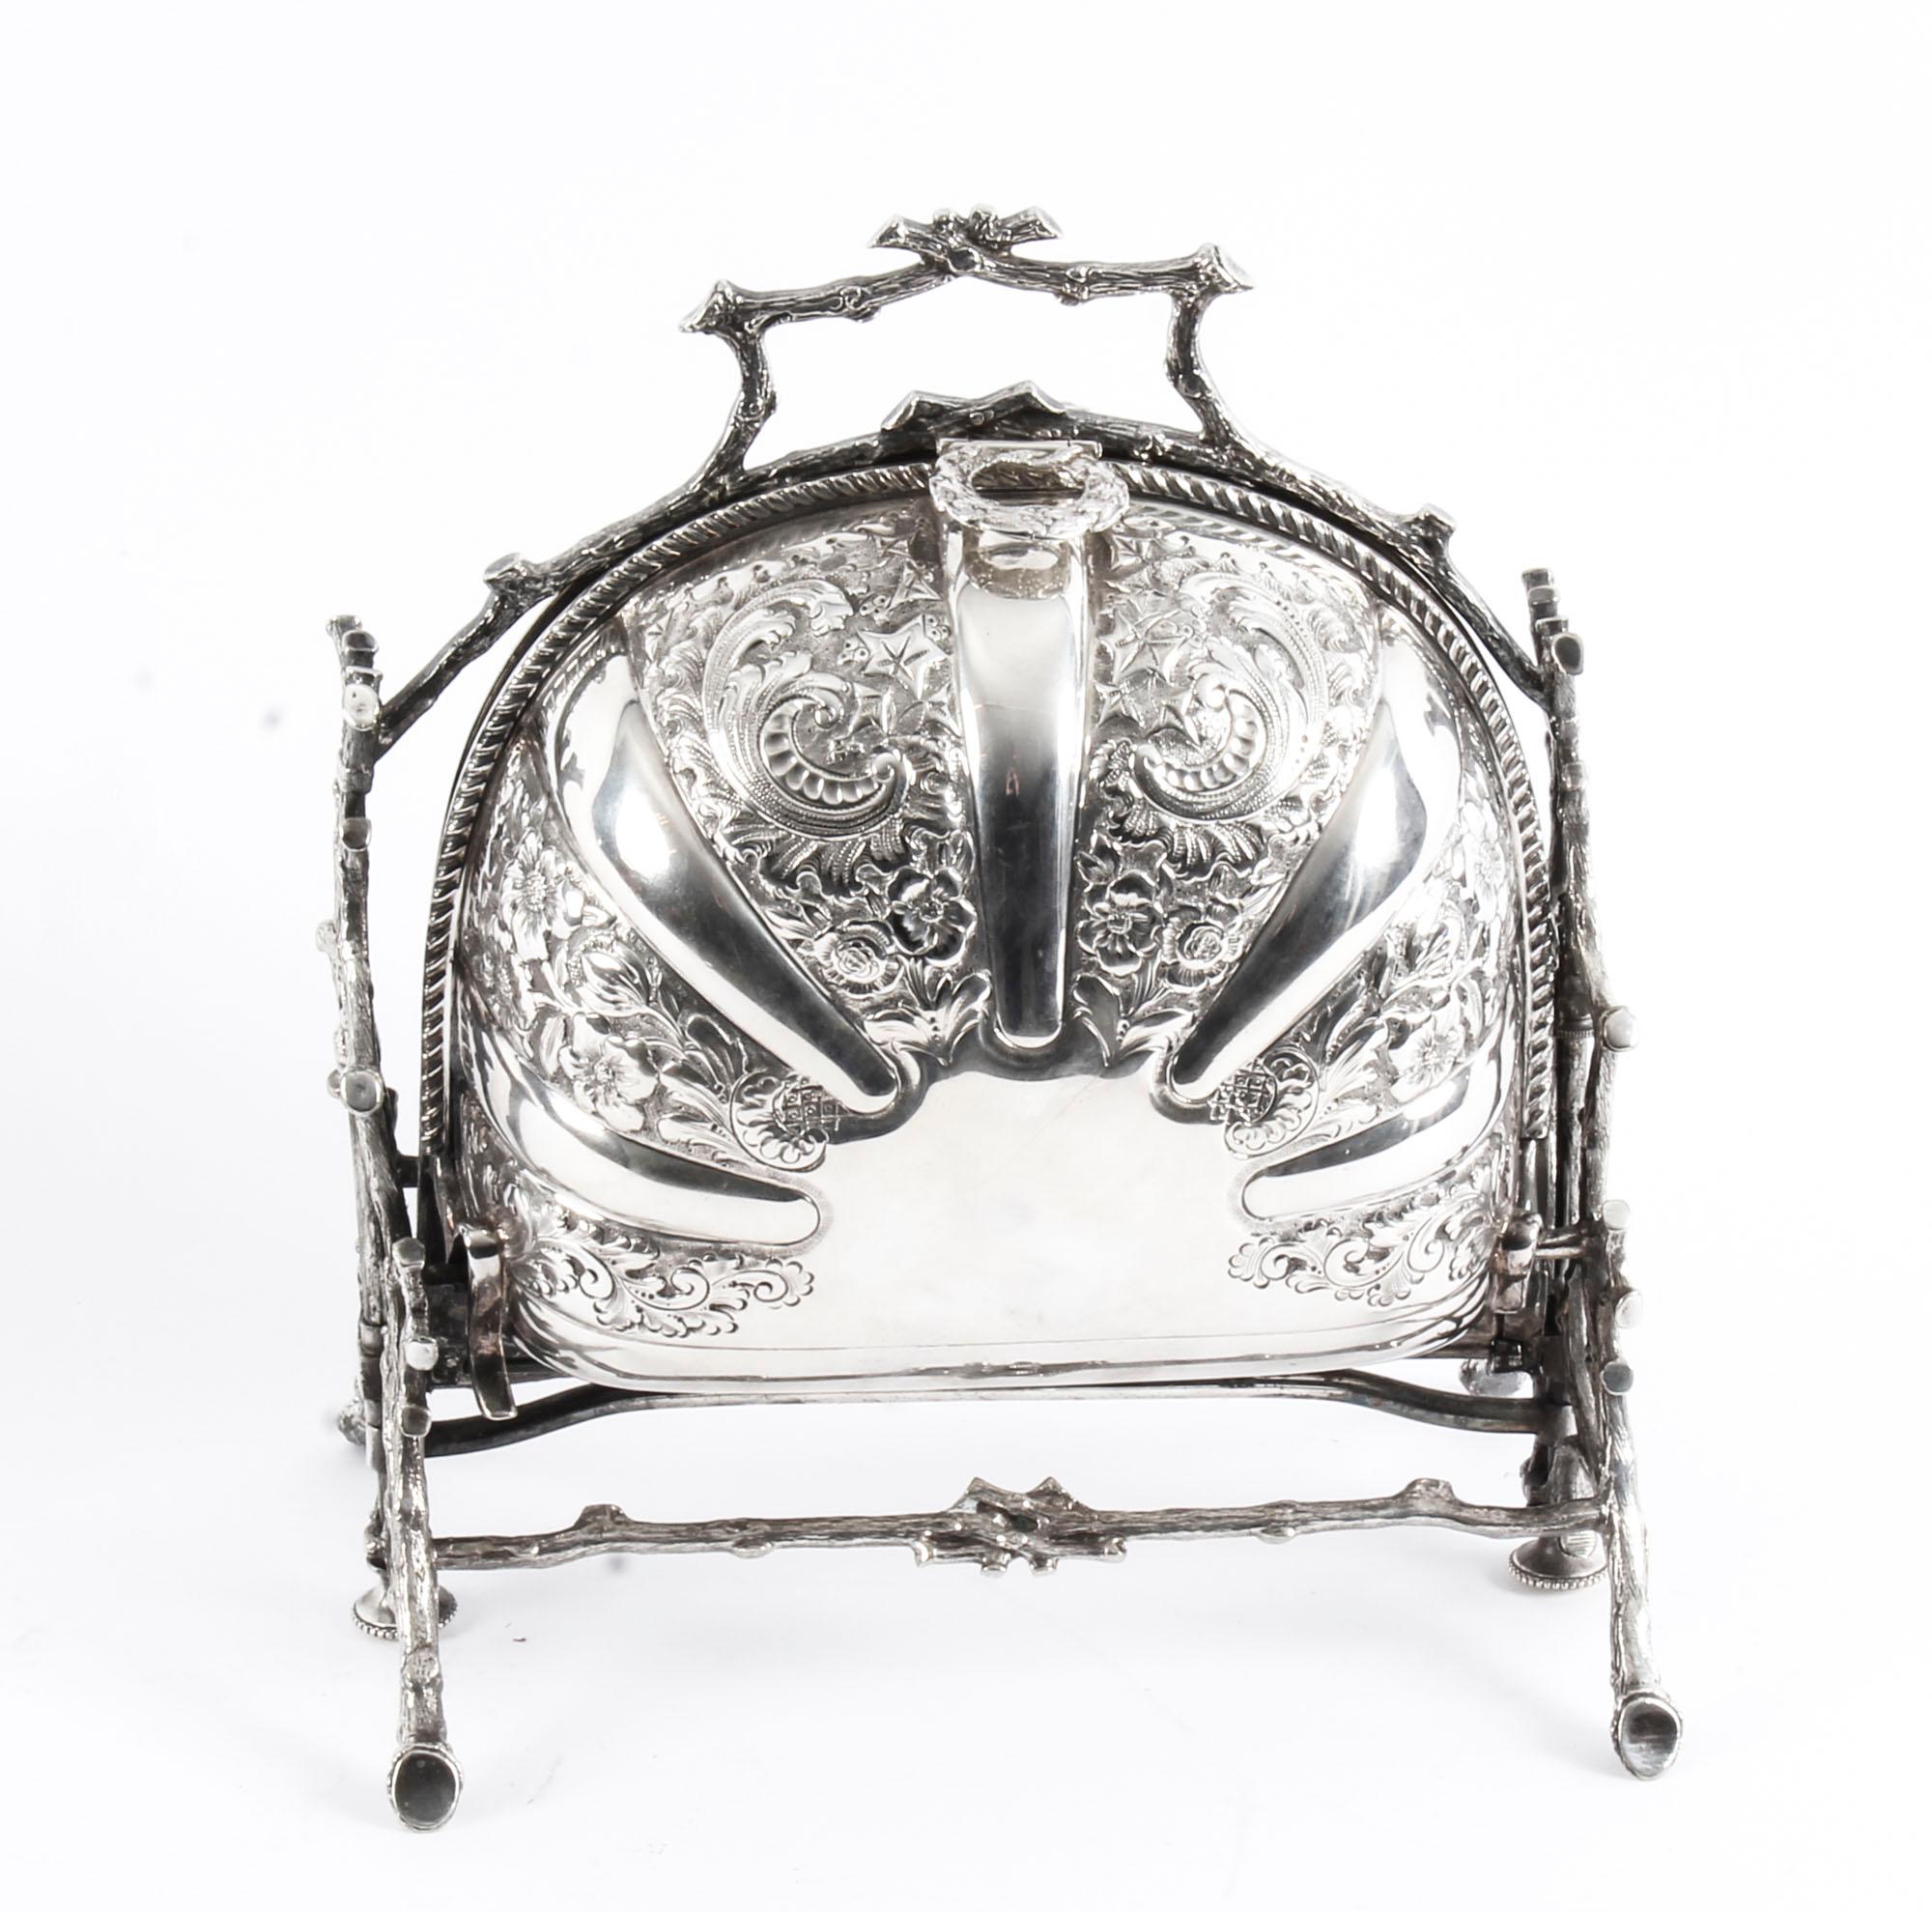 English Silver Plate Folding Sweets Biscuit Box The Alexander Clark, 19th Century